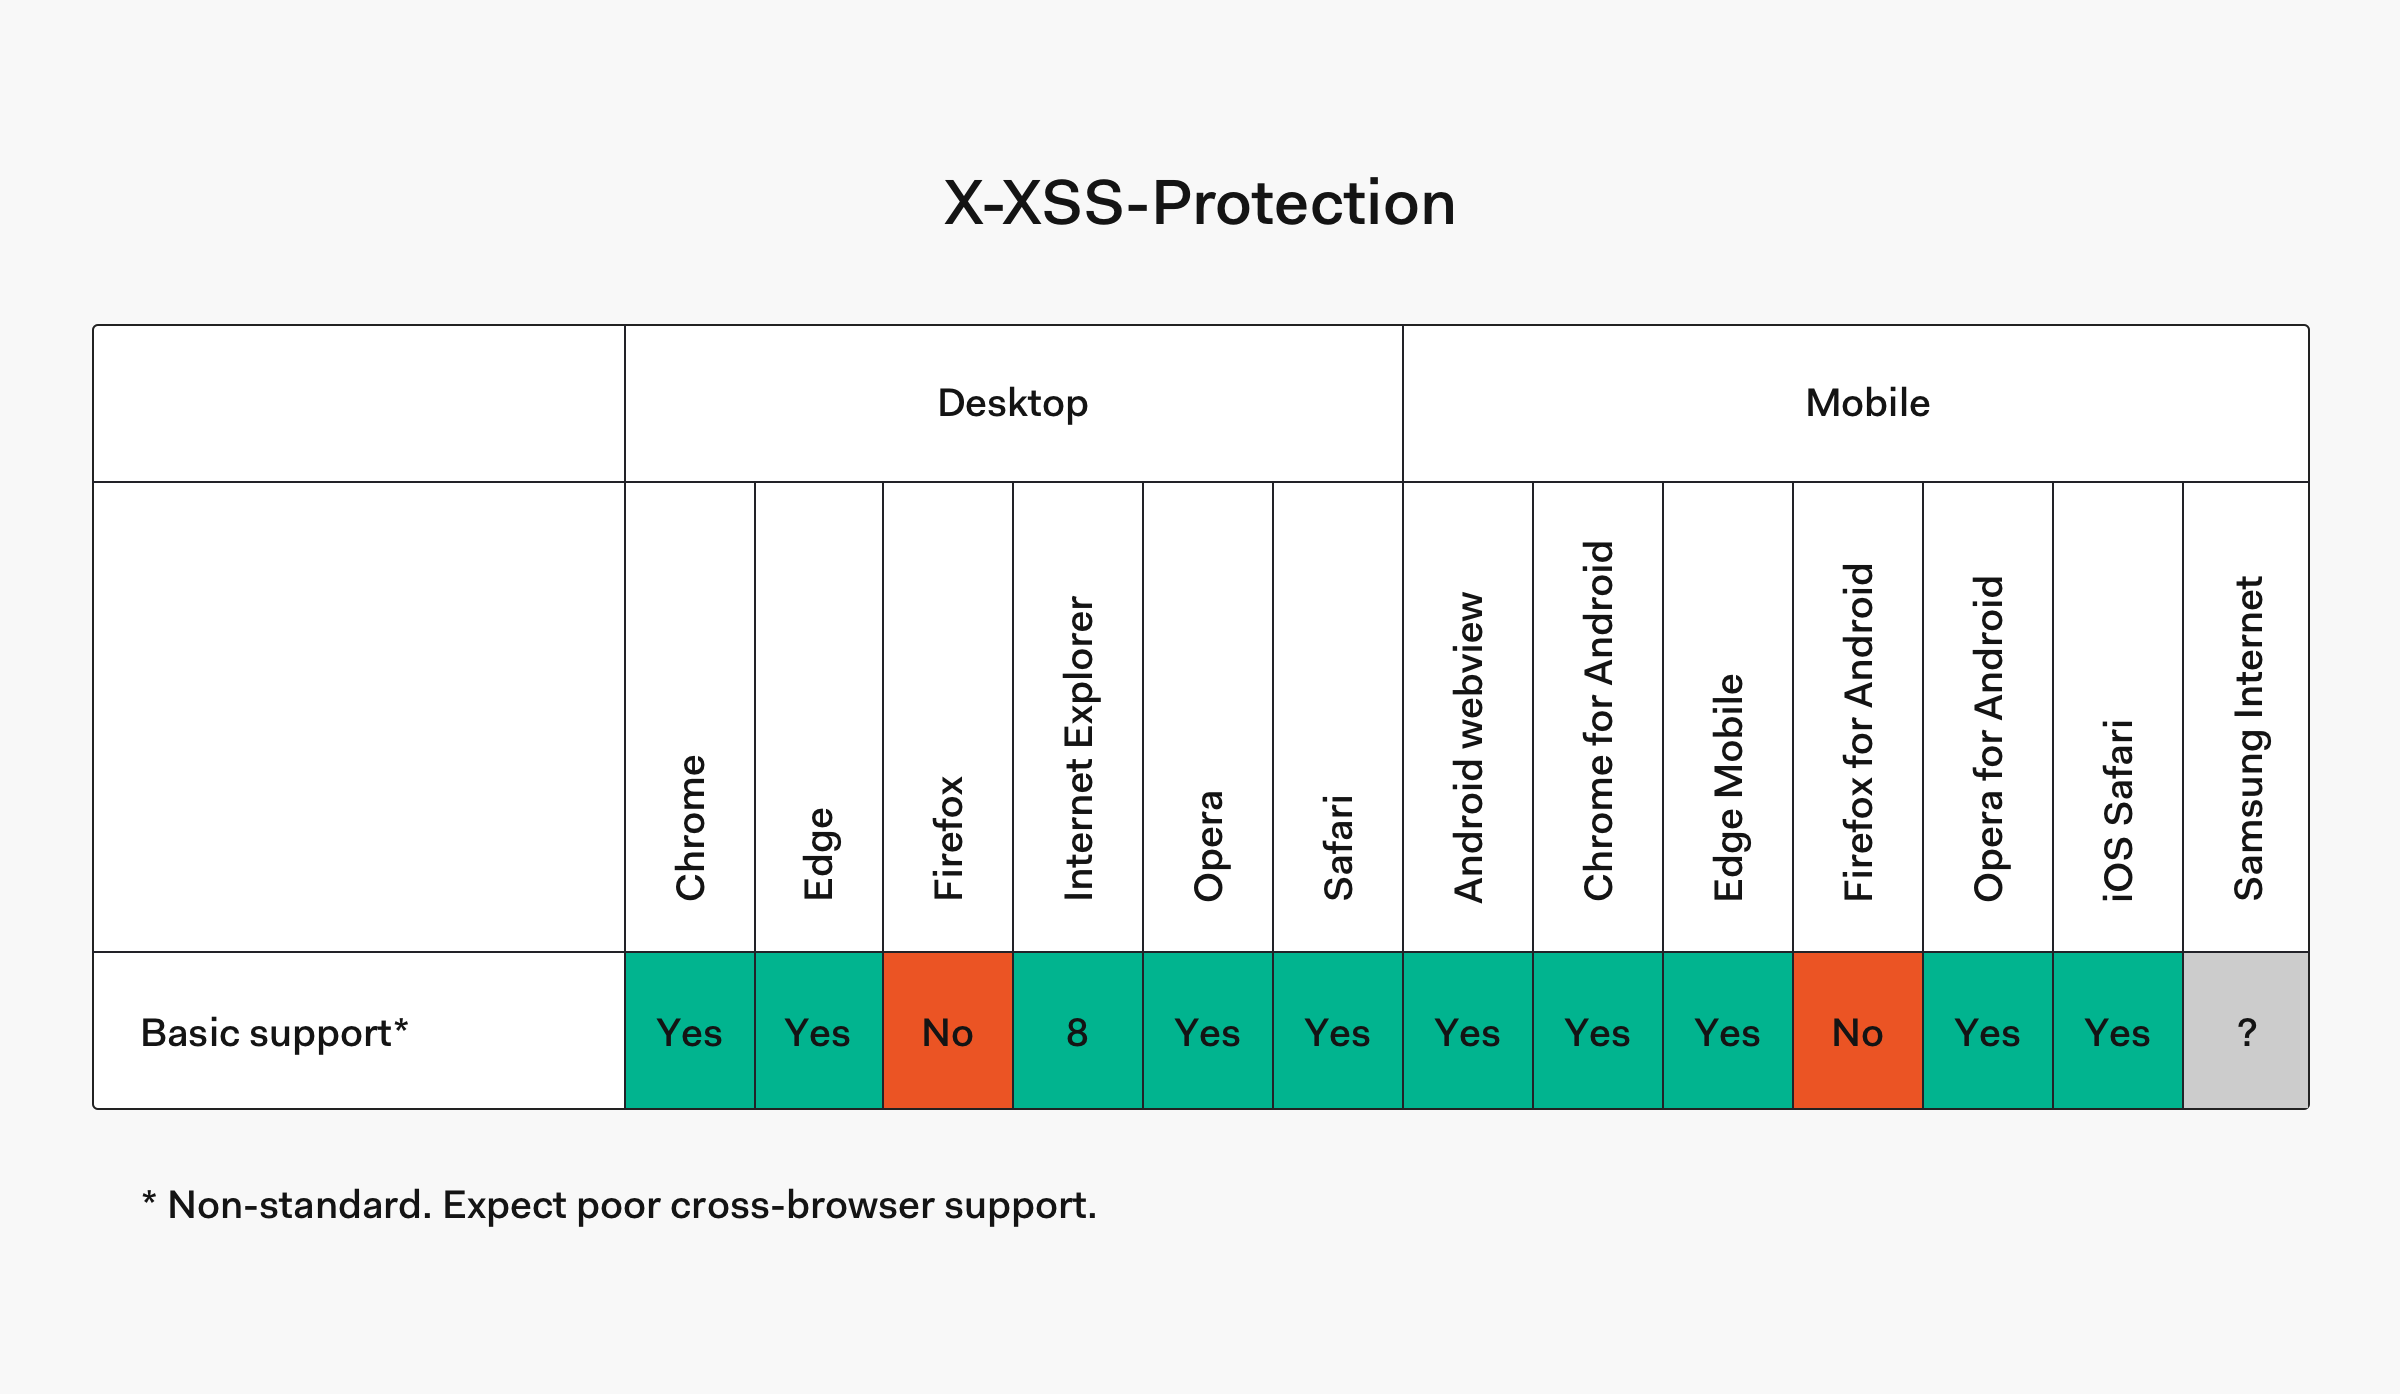 X-XSS-Protection browser compatibility table